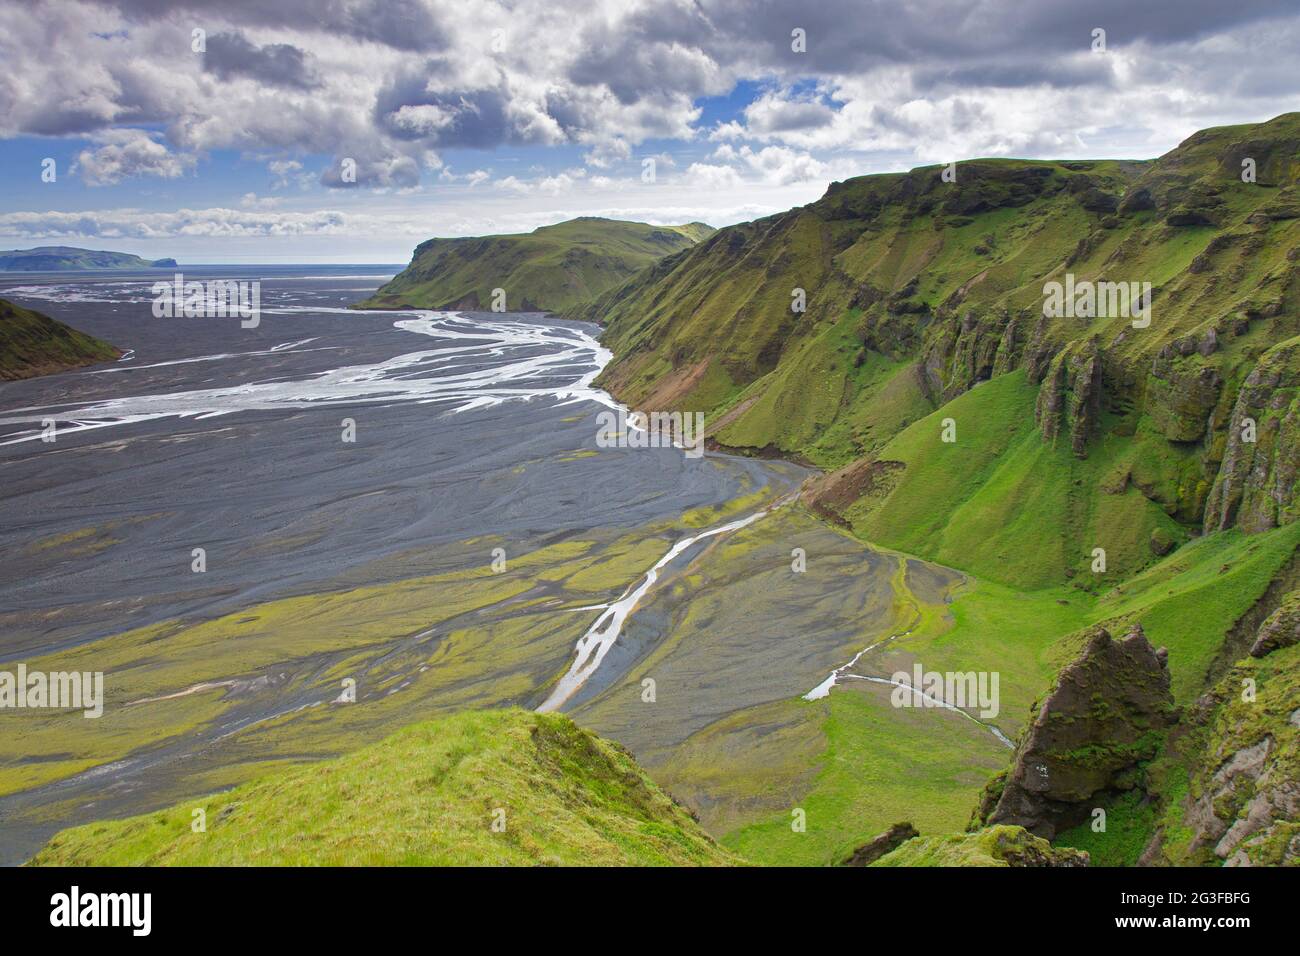 View over the glacial river Múlakvísl which draws its water from the Mýrdalsjökull, Sudurland on the western side of Mýrdalssandur, South Iceland Stock Photo